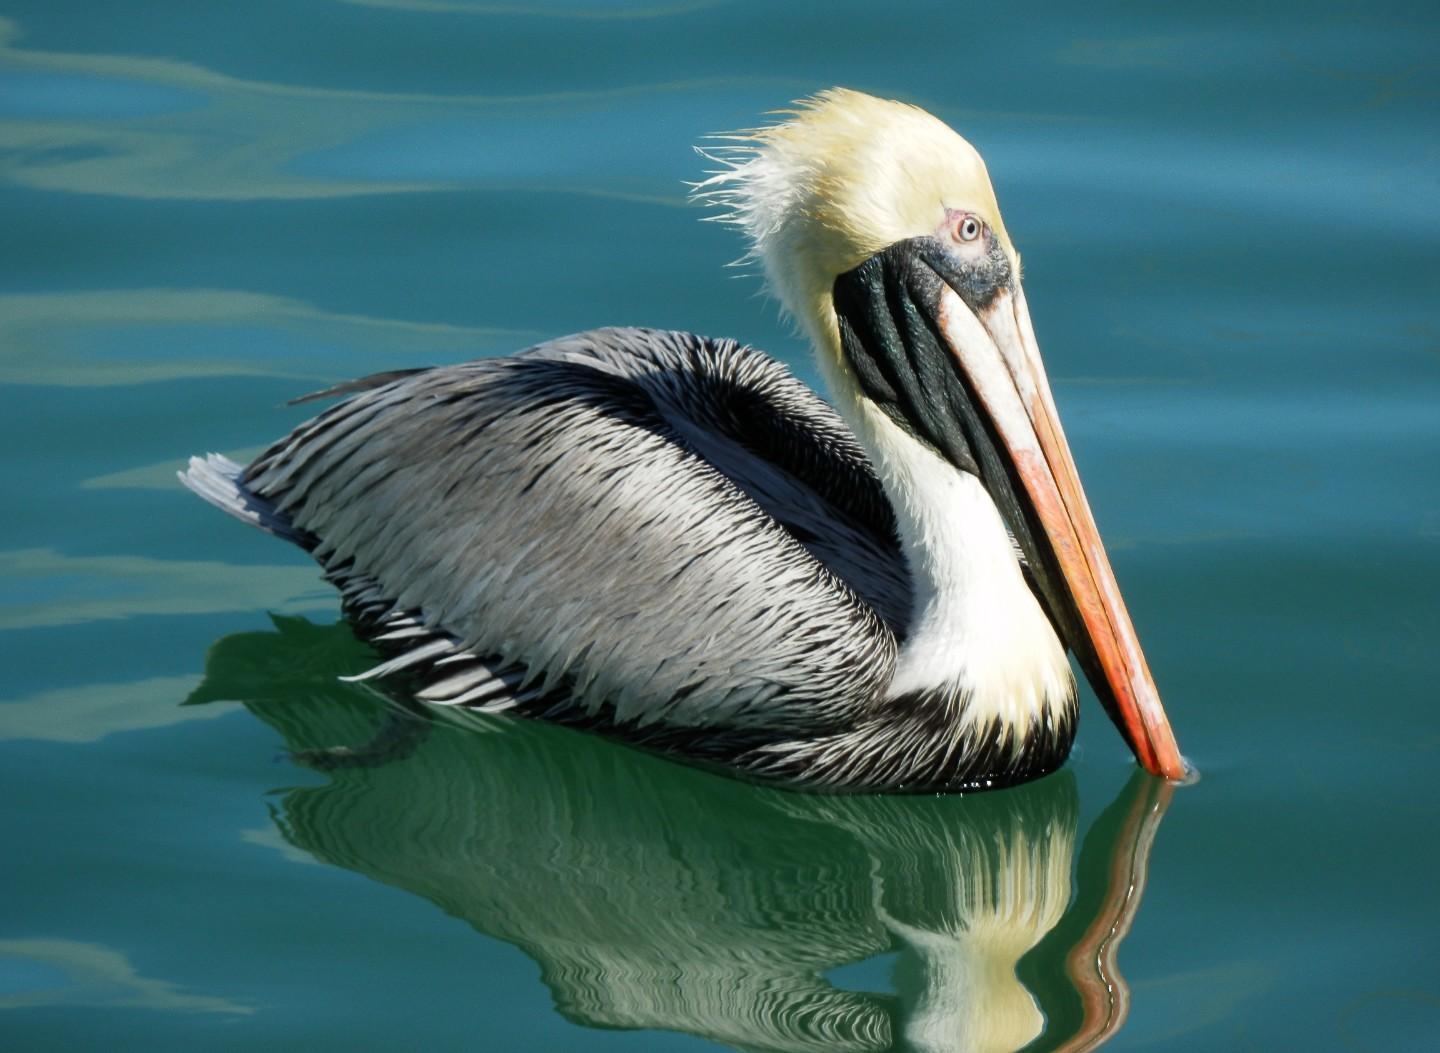 Brown Pelican Photo by Marilyn O'Connell